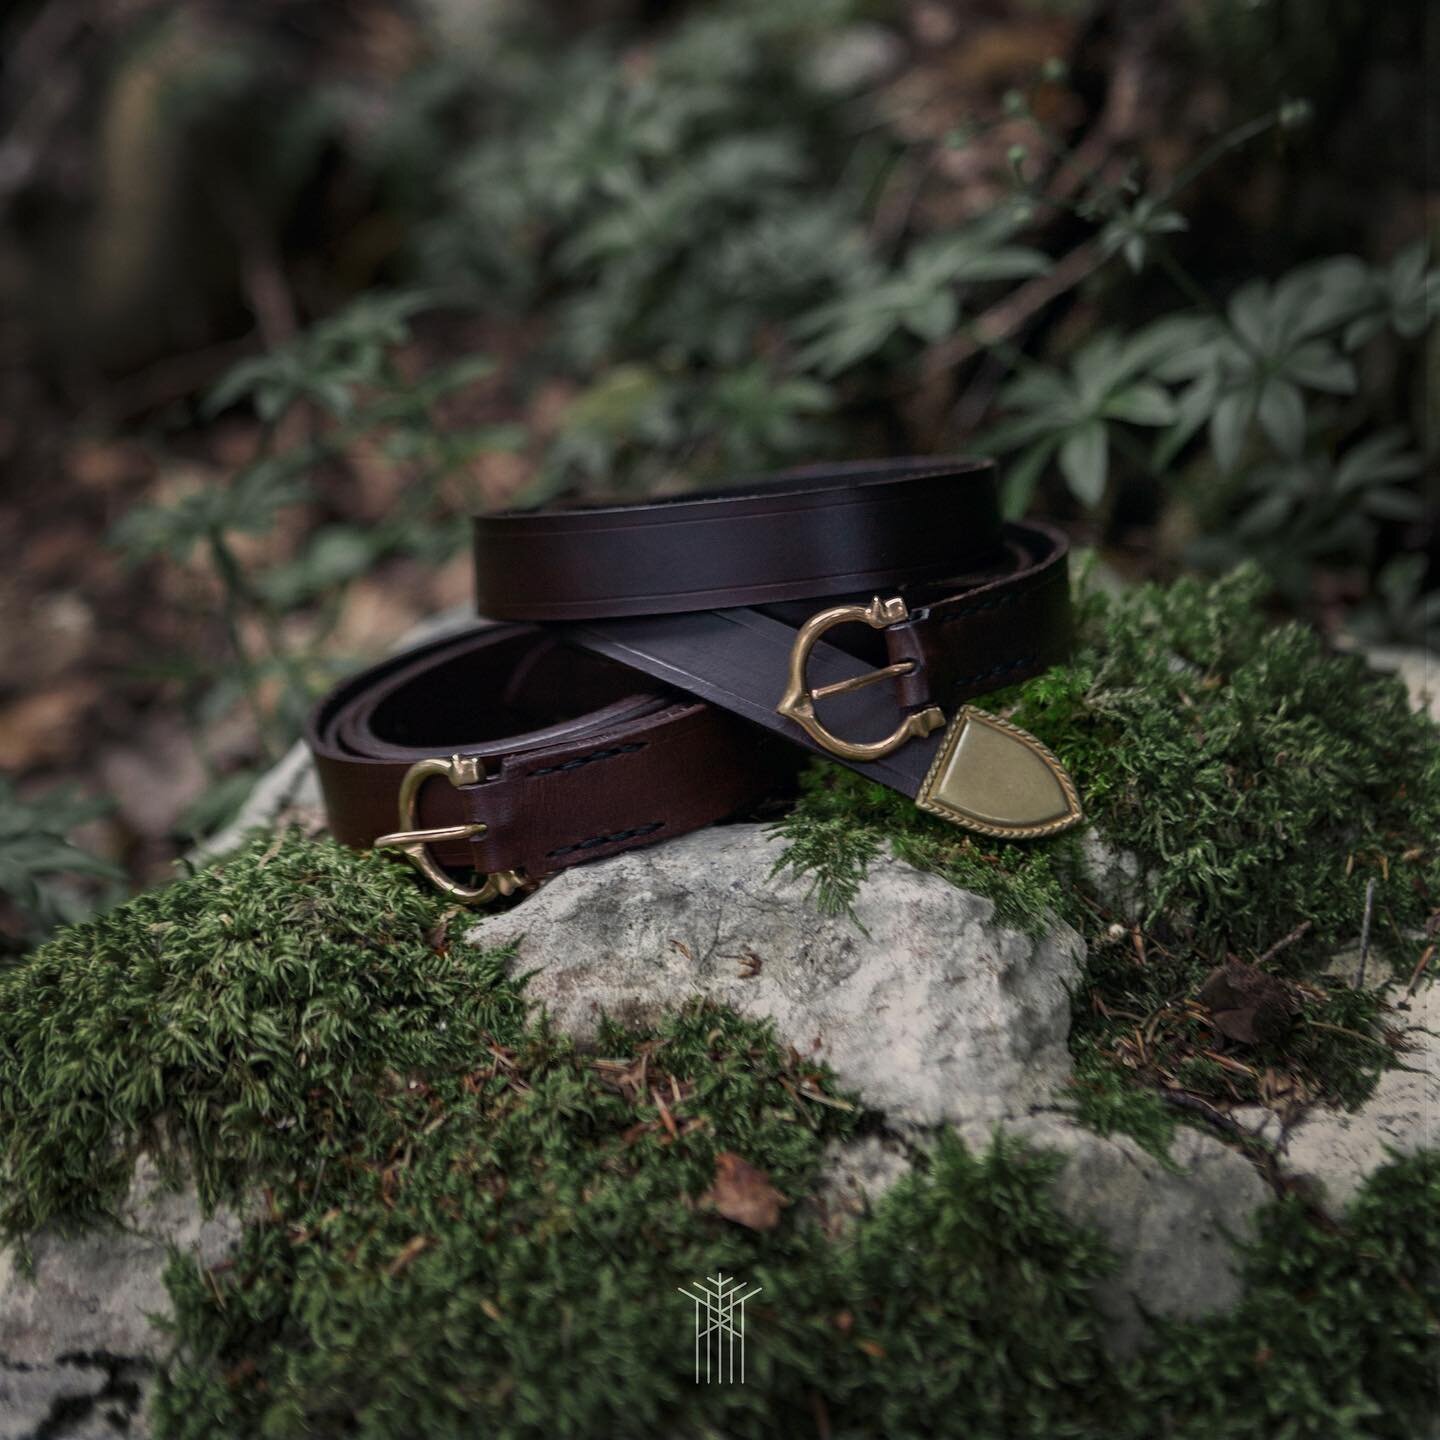 Leather belt

A simple yet elegant and functional quality leather belt. Pouches, armor, and many other elements can be attached to it, making it an extremely useful piece of gear to enhance your costume, visually and practically!

Custom made to your